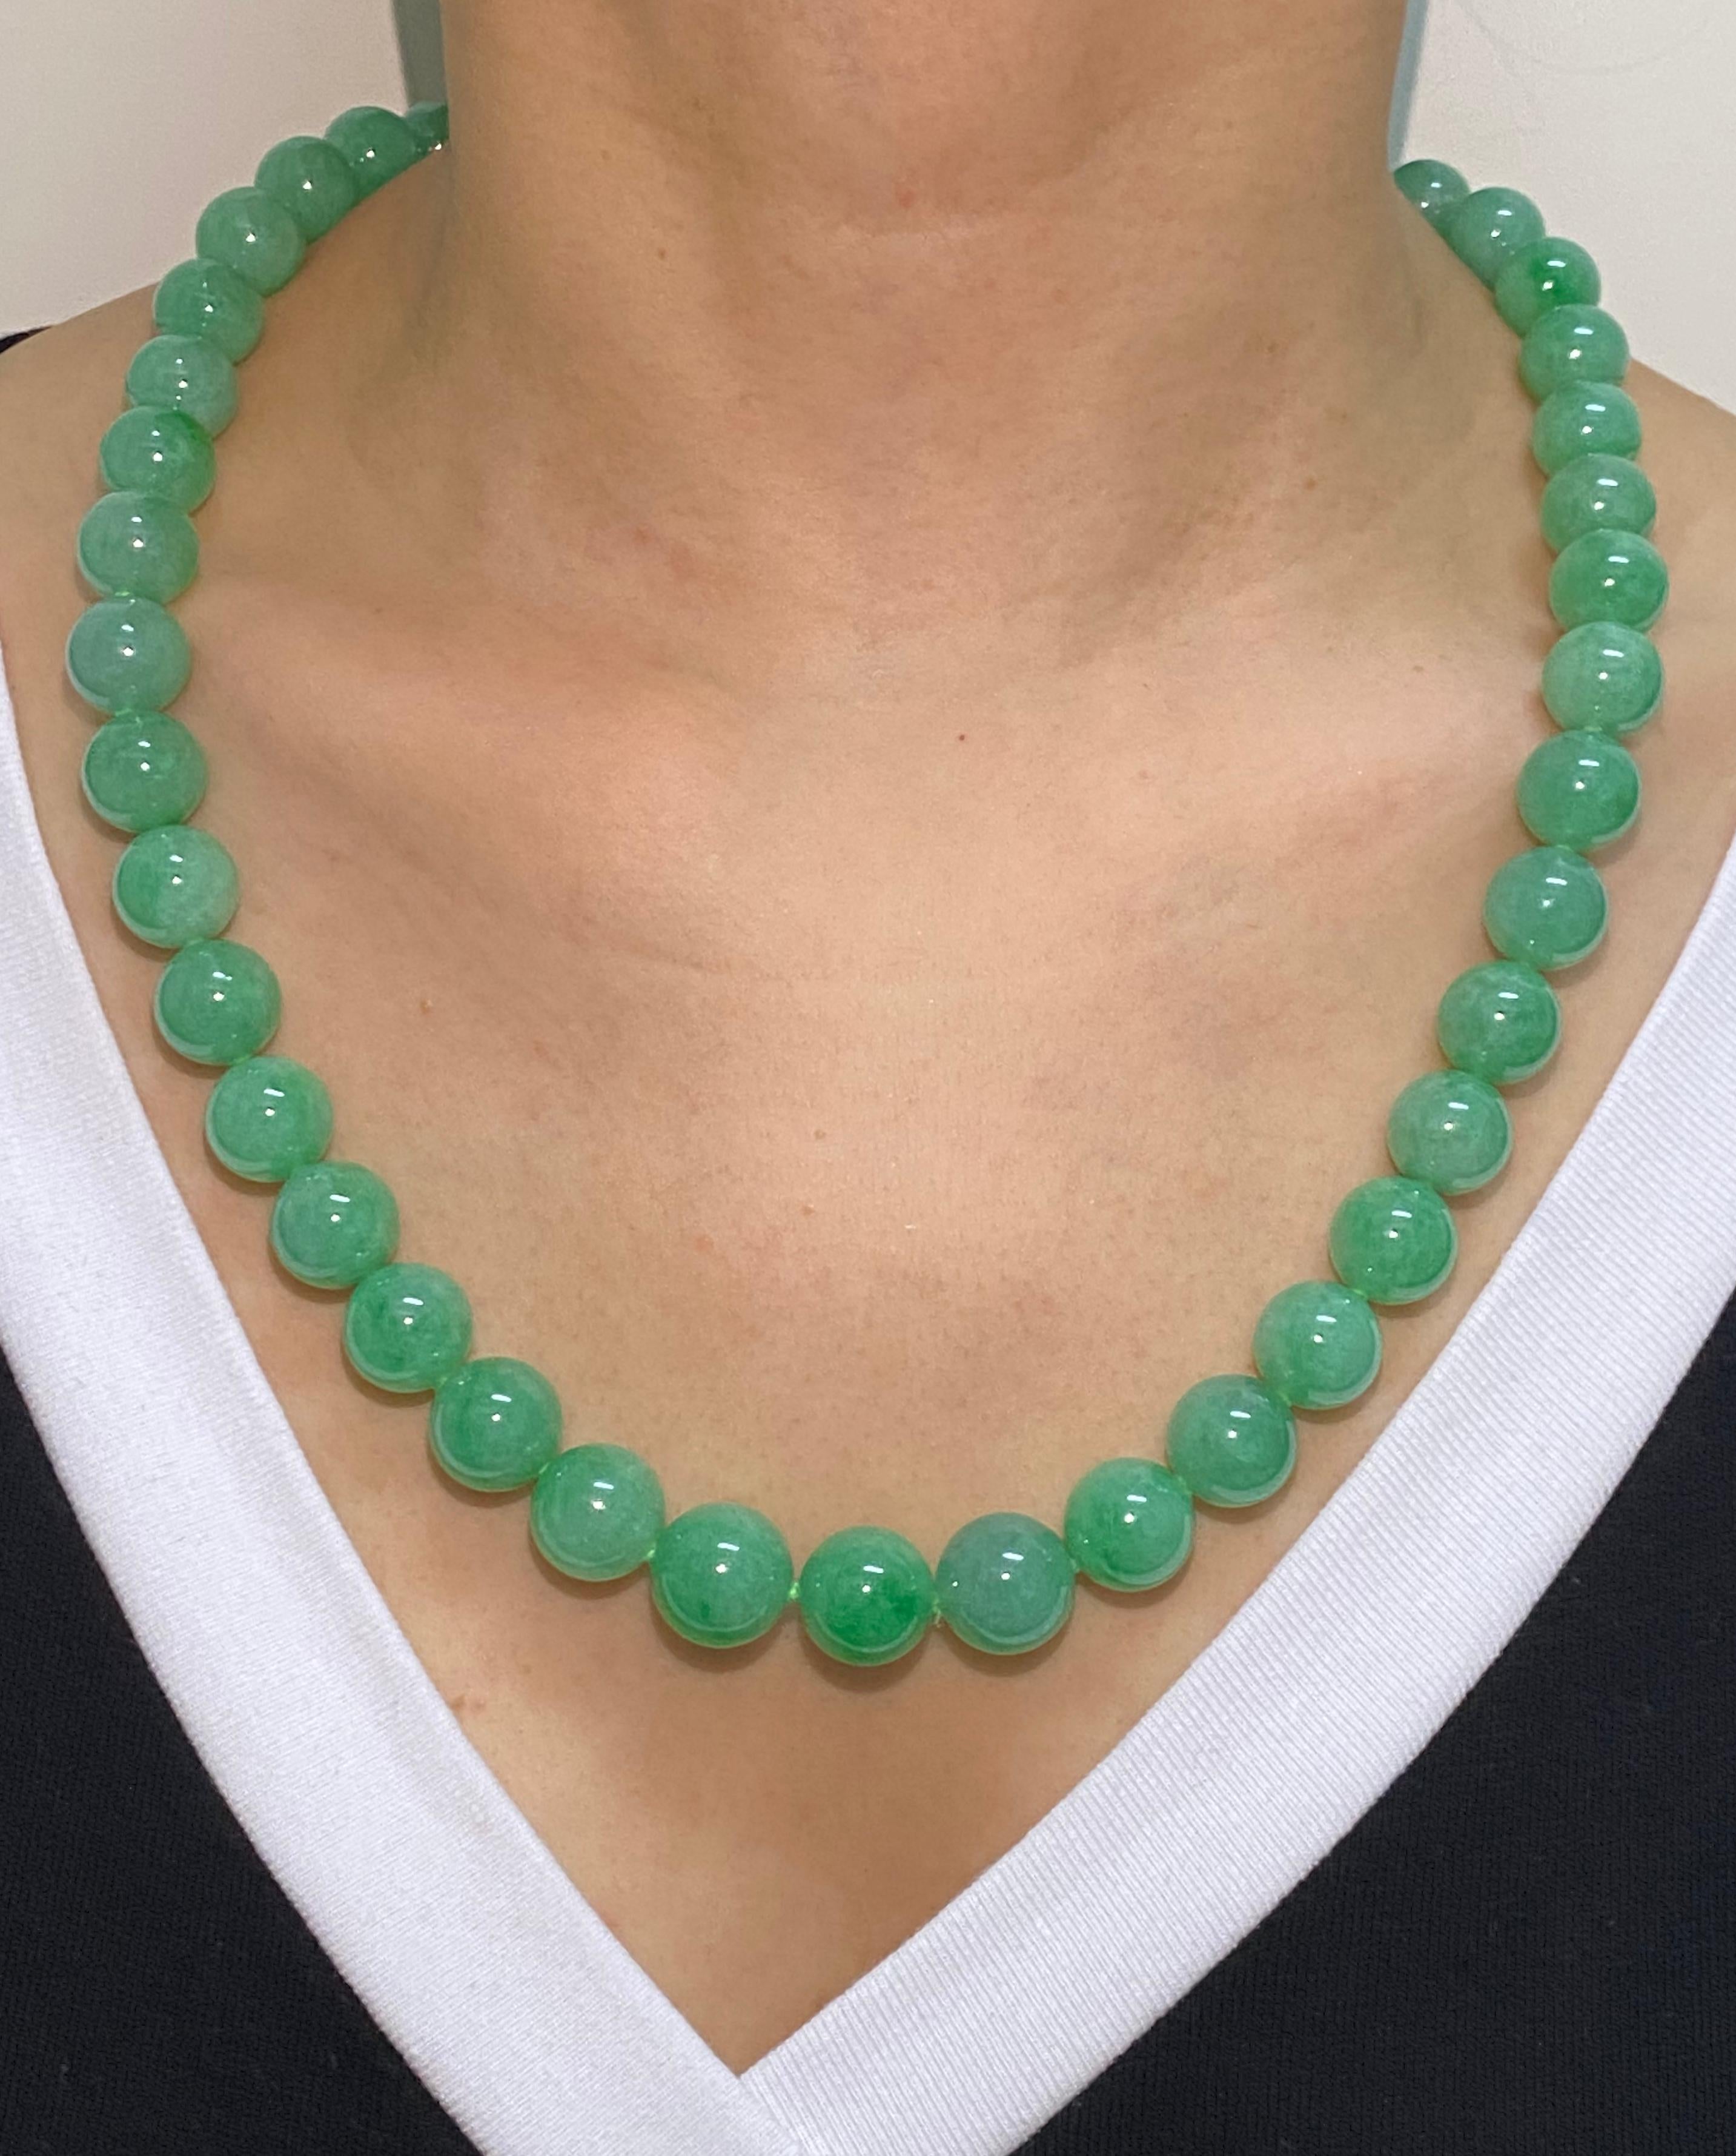 For your consideration is an important set of jade necklace and diamond earrings. Hard to find this size (almost 14mm) natural jade beads with natural apple green color. This is a rare set! There are 45 jade beads from 13.93mm biggest, 12.53 in the